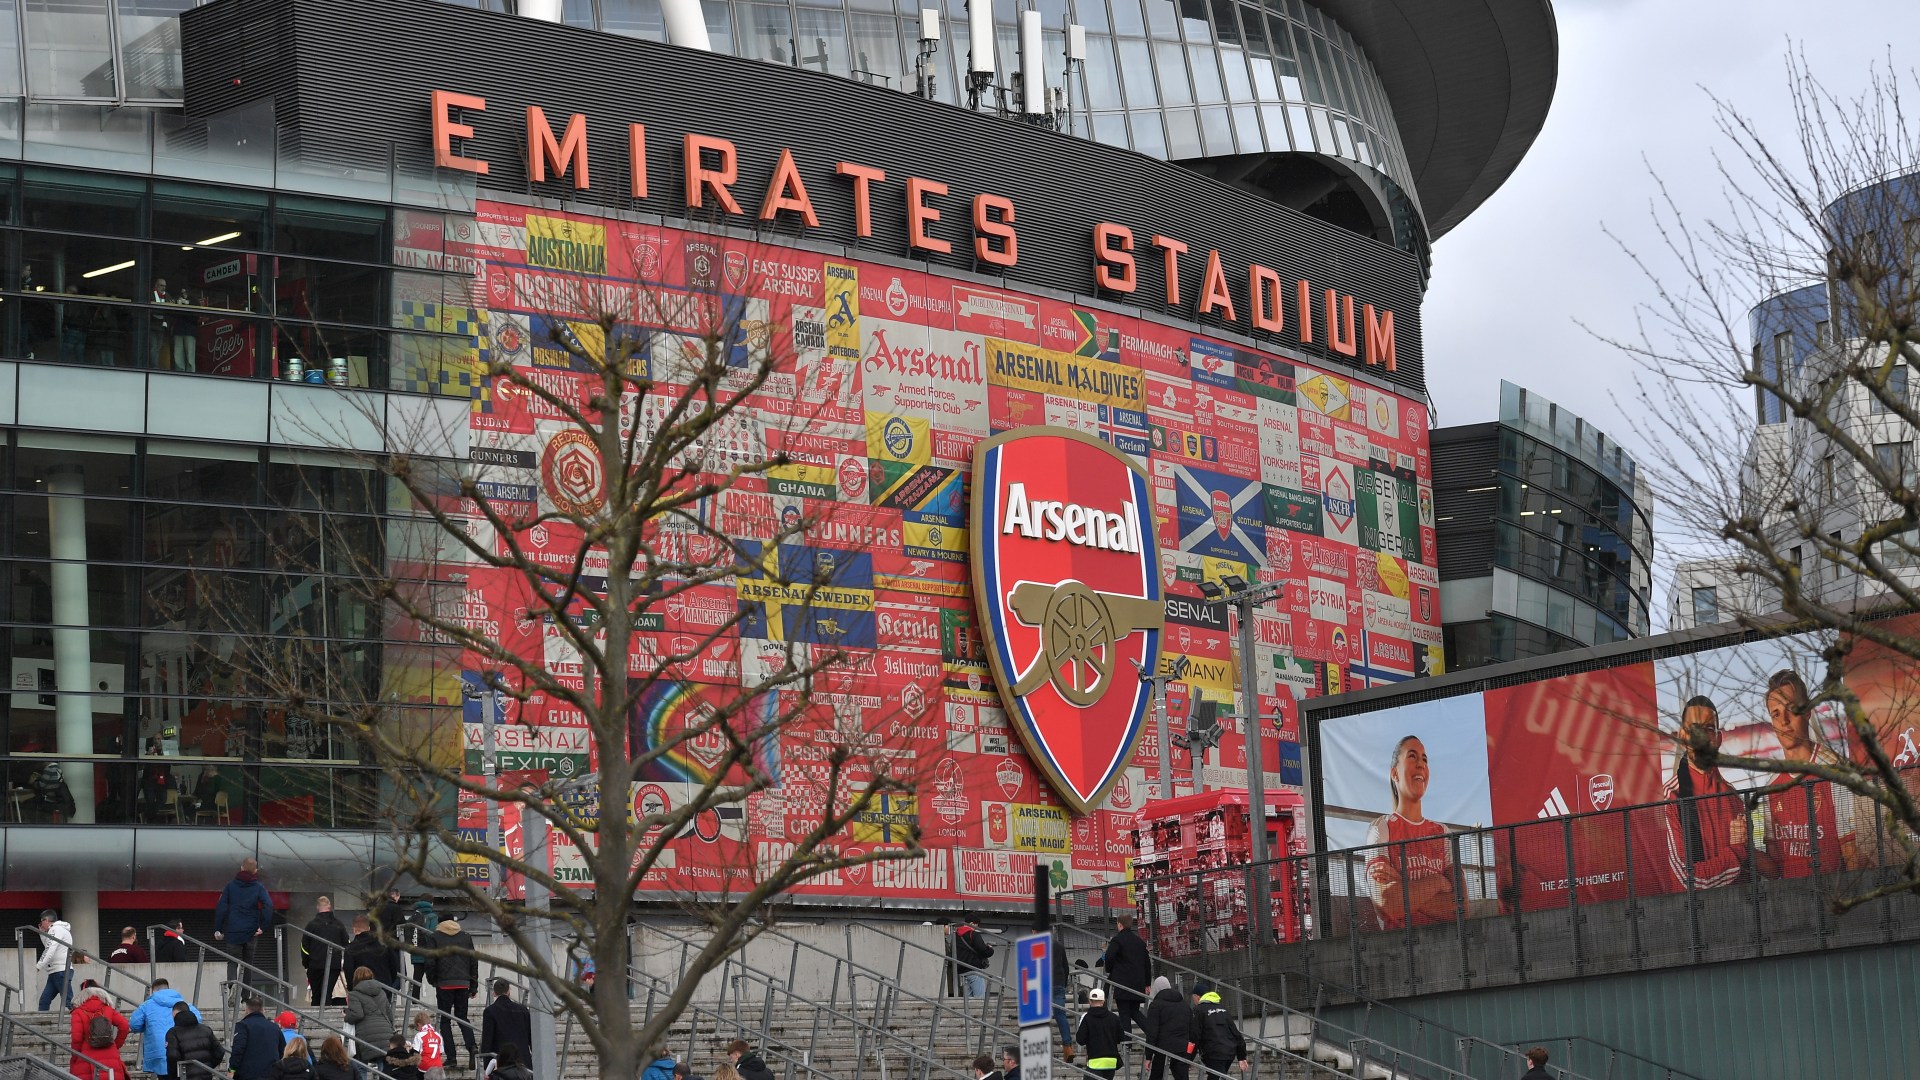 Arsenal release statement after ISIS threat to Emirates Stadium ahead of Champions League quarter-final vs Bayern Munich [Video]